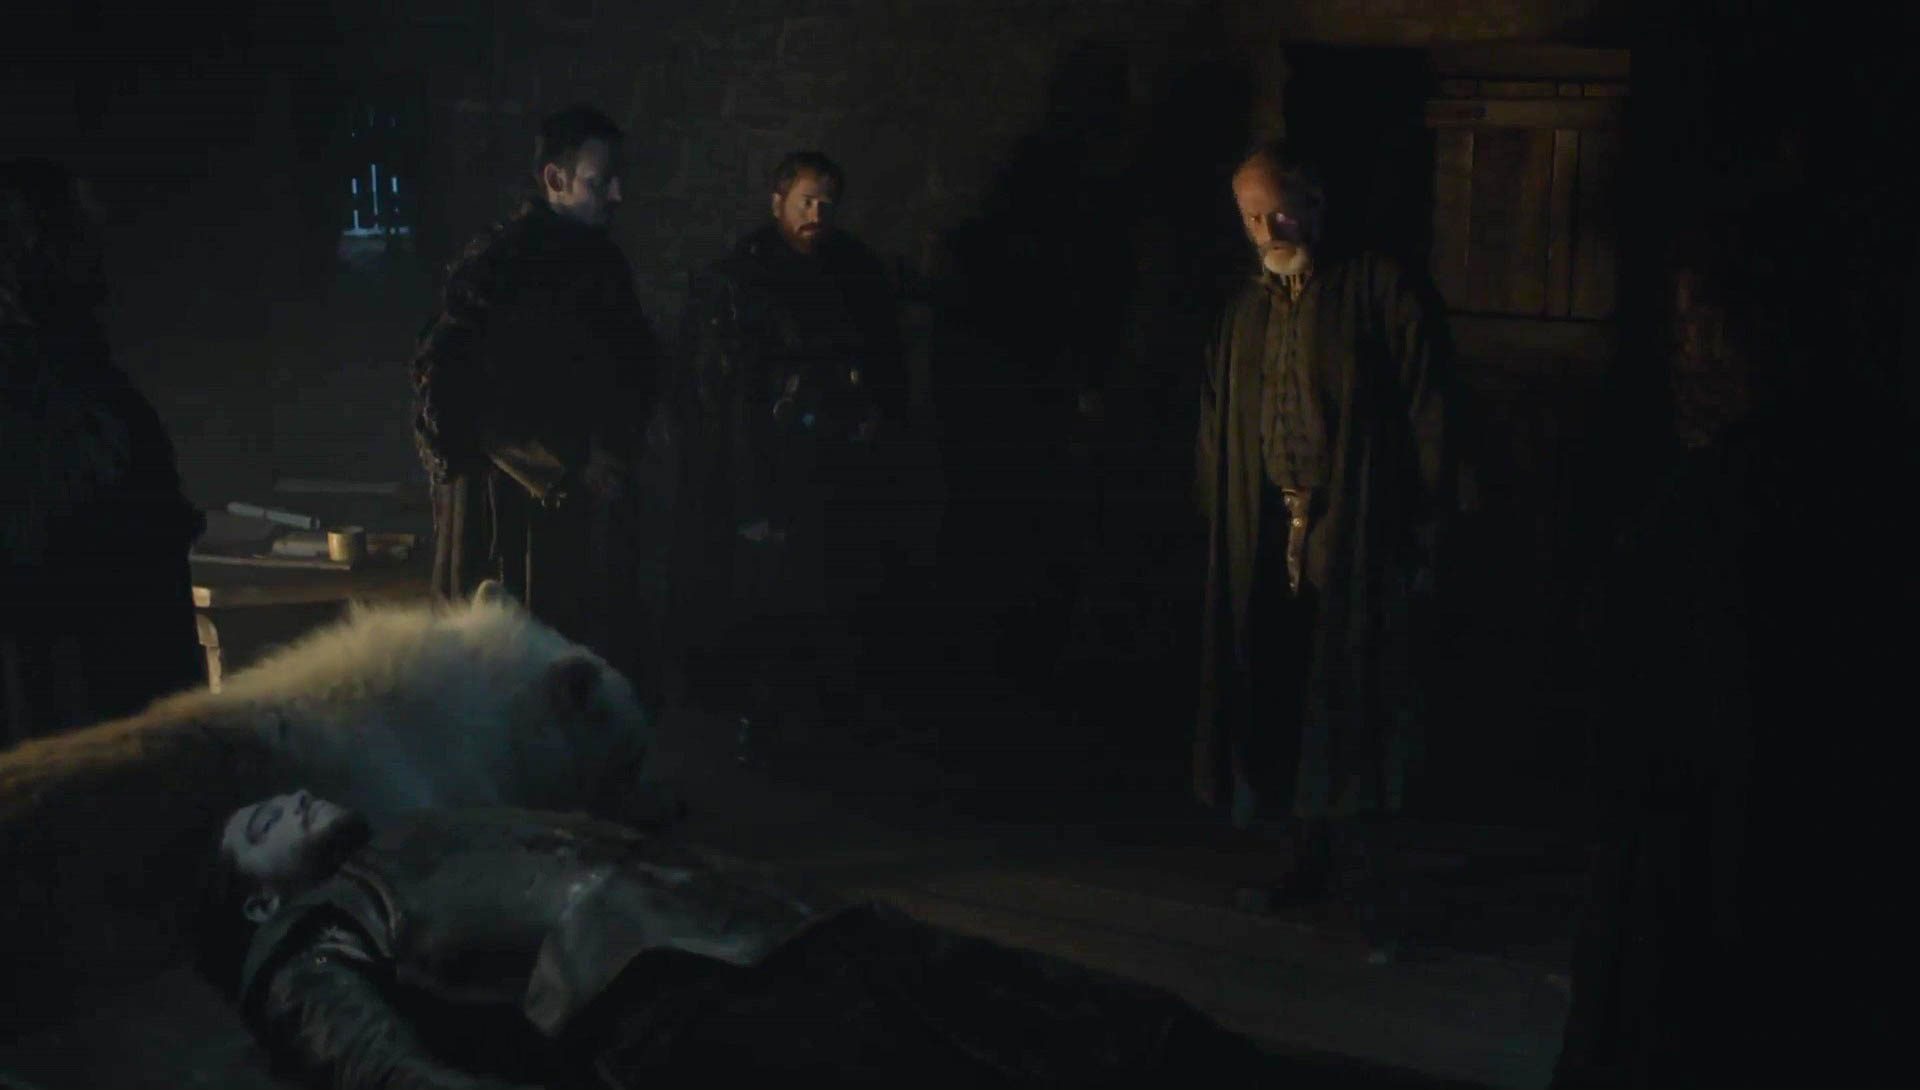 WATCH: New ‘Game of Thrones’ season 6 clip released